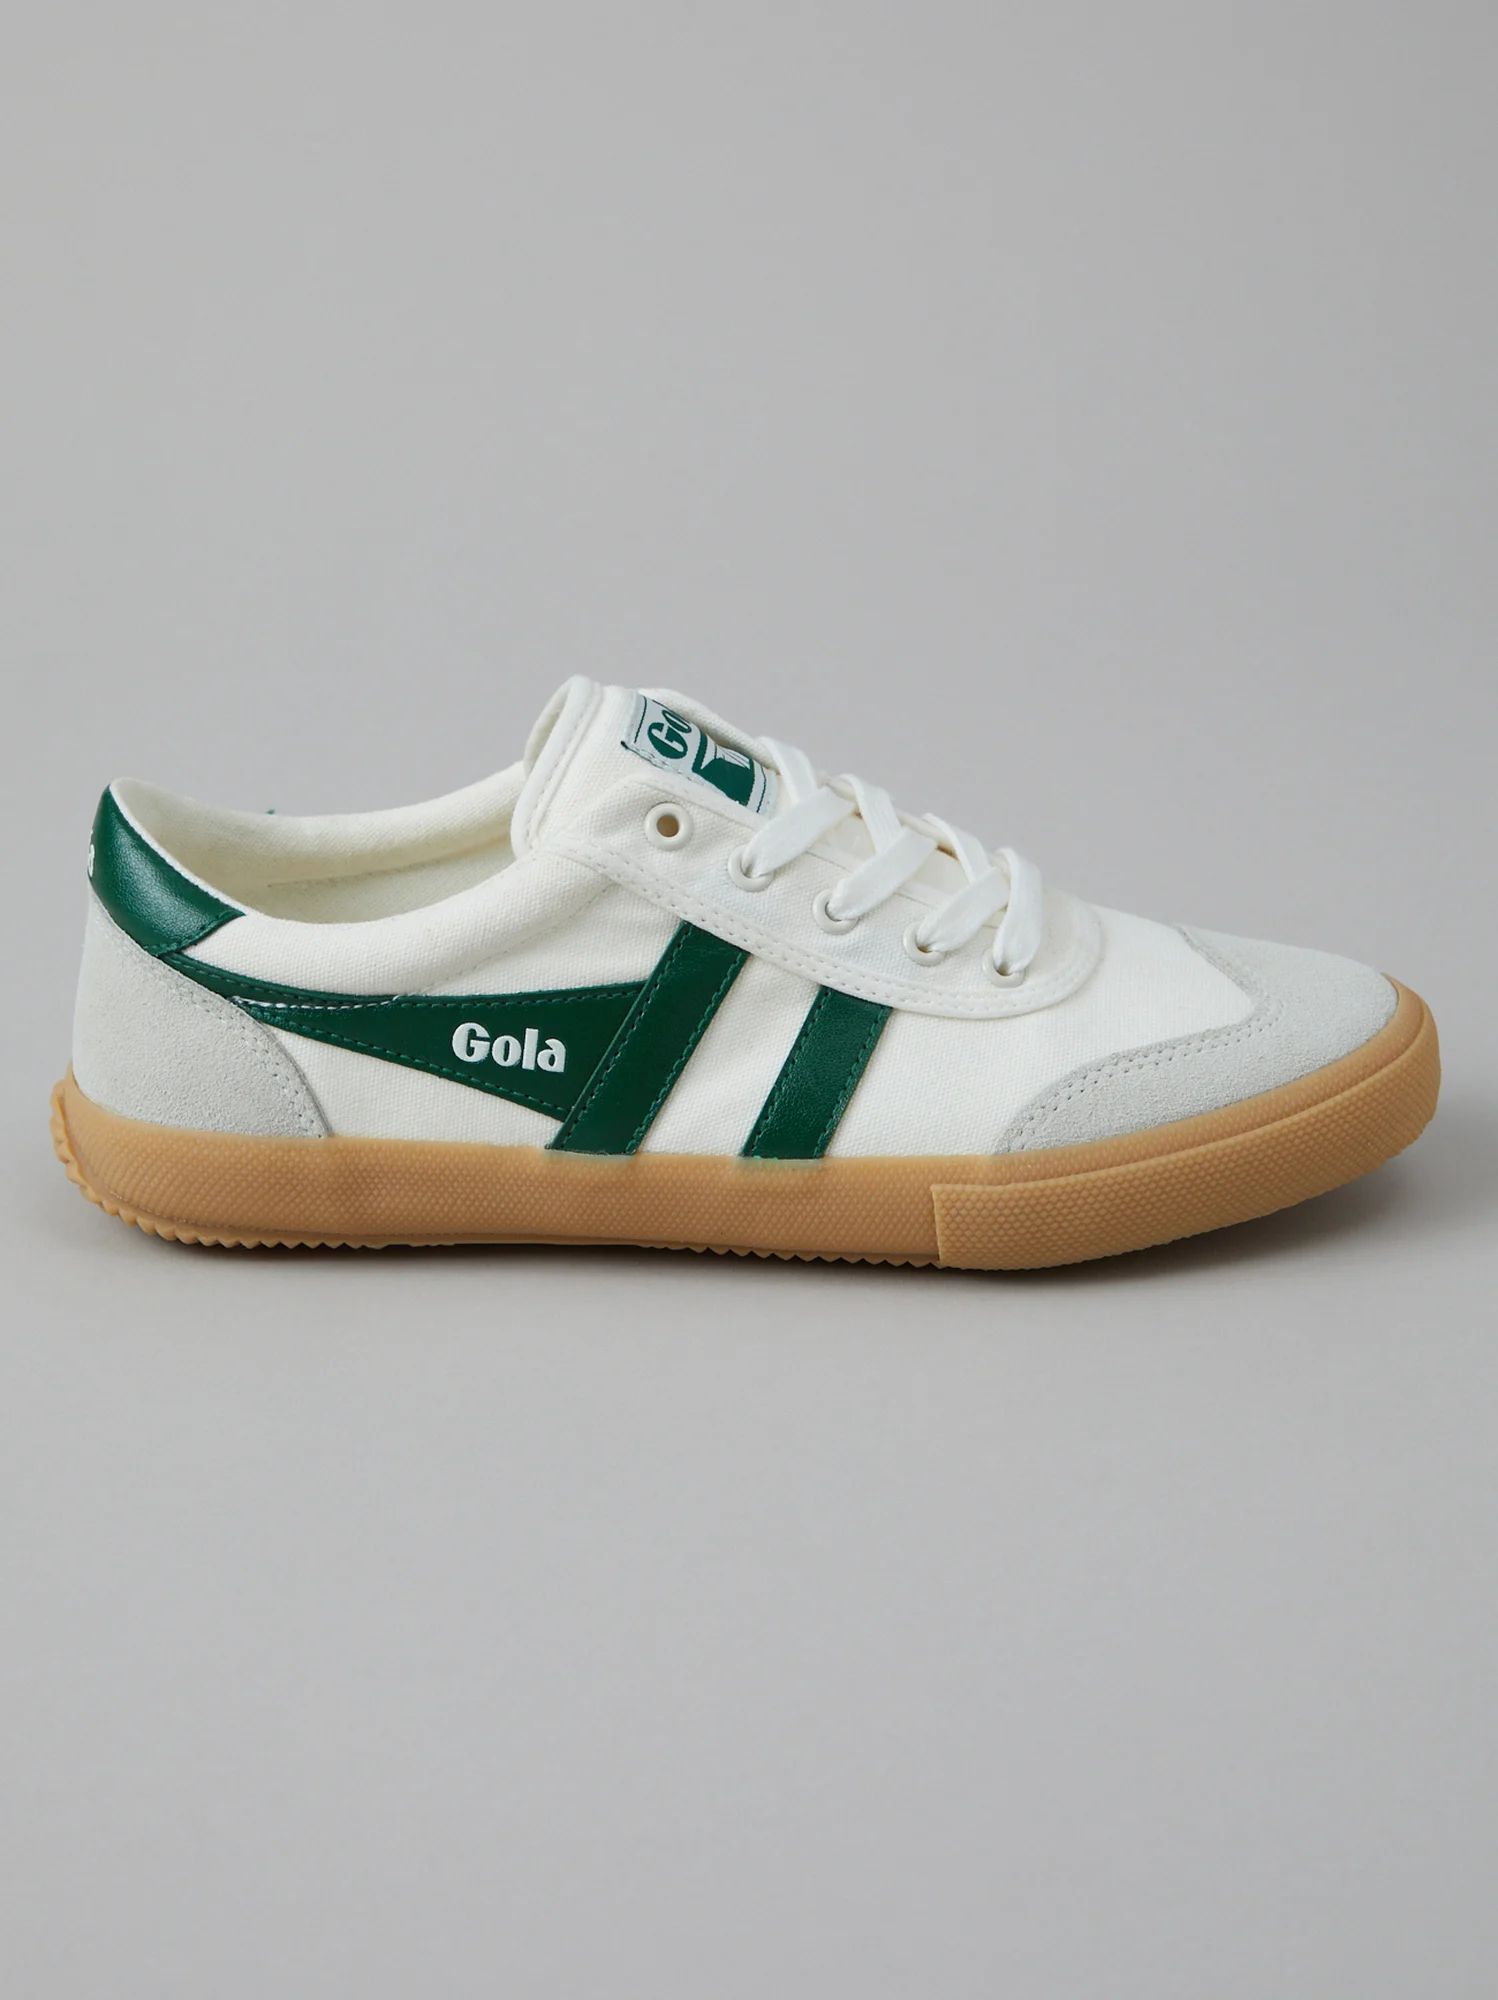 Gola Badminton Plimsoll Sneakers in Green & White | Altar'd State | Altar'd State